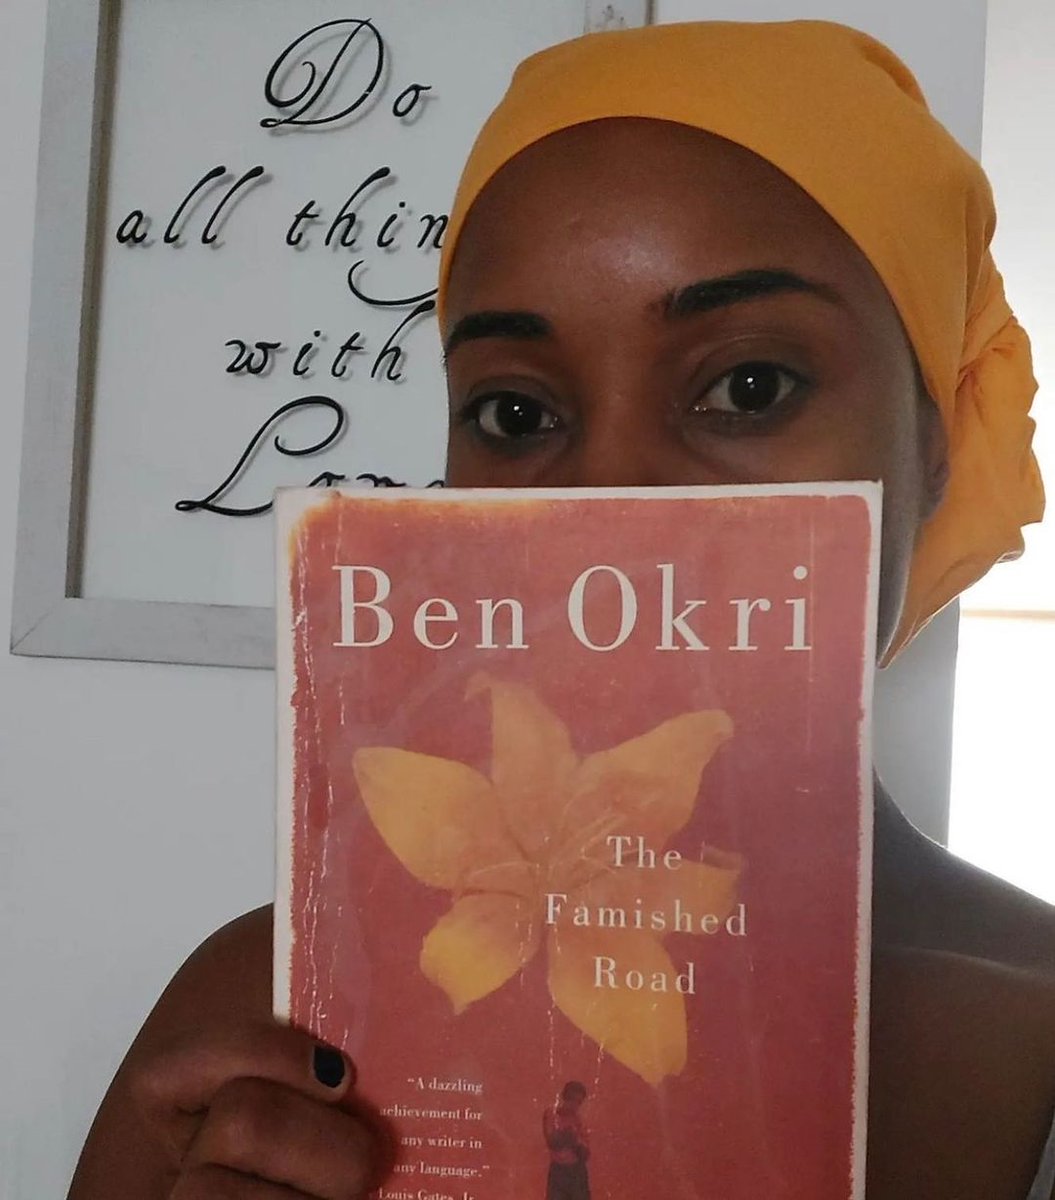 ookjoint #blackpeopleread #writer #poet #poetry #b#BookLoverofIG Mental Health Check In 🫶🏾 How are y’all feeling today? 
•
📖 The Famished Road - Ben Okri
•
(Wanna be featured on our page? Tag us in your pics😊)
•
SOURCE: @africanabookbae 
#thebookjoint #blackpeoplere